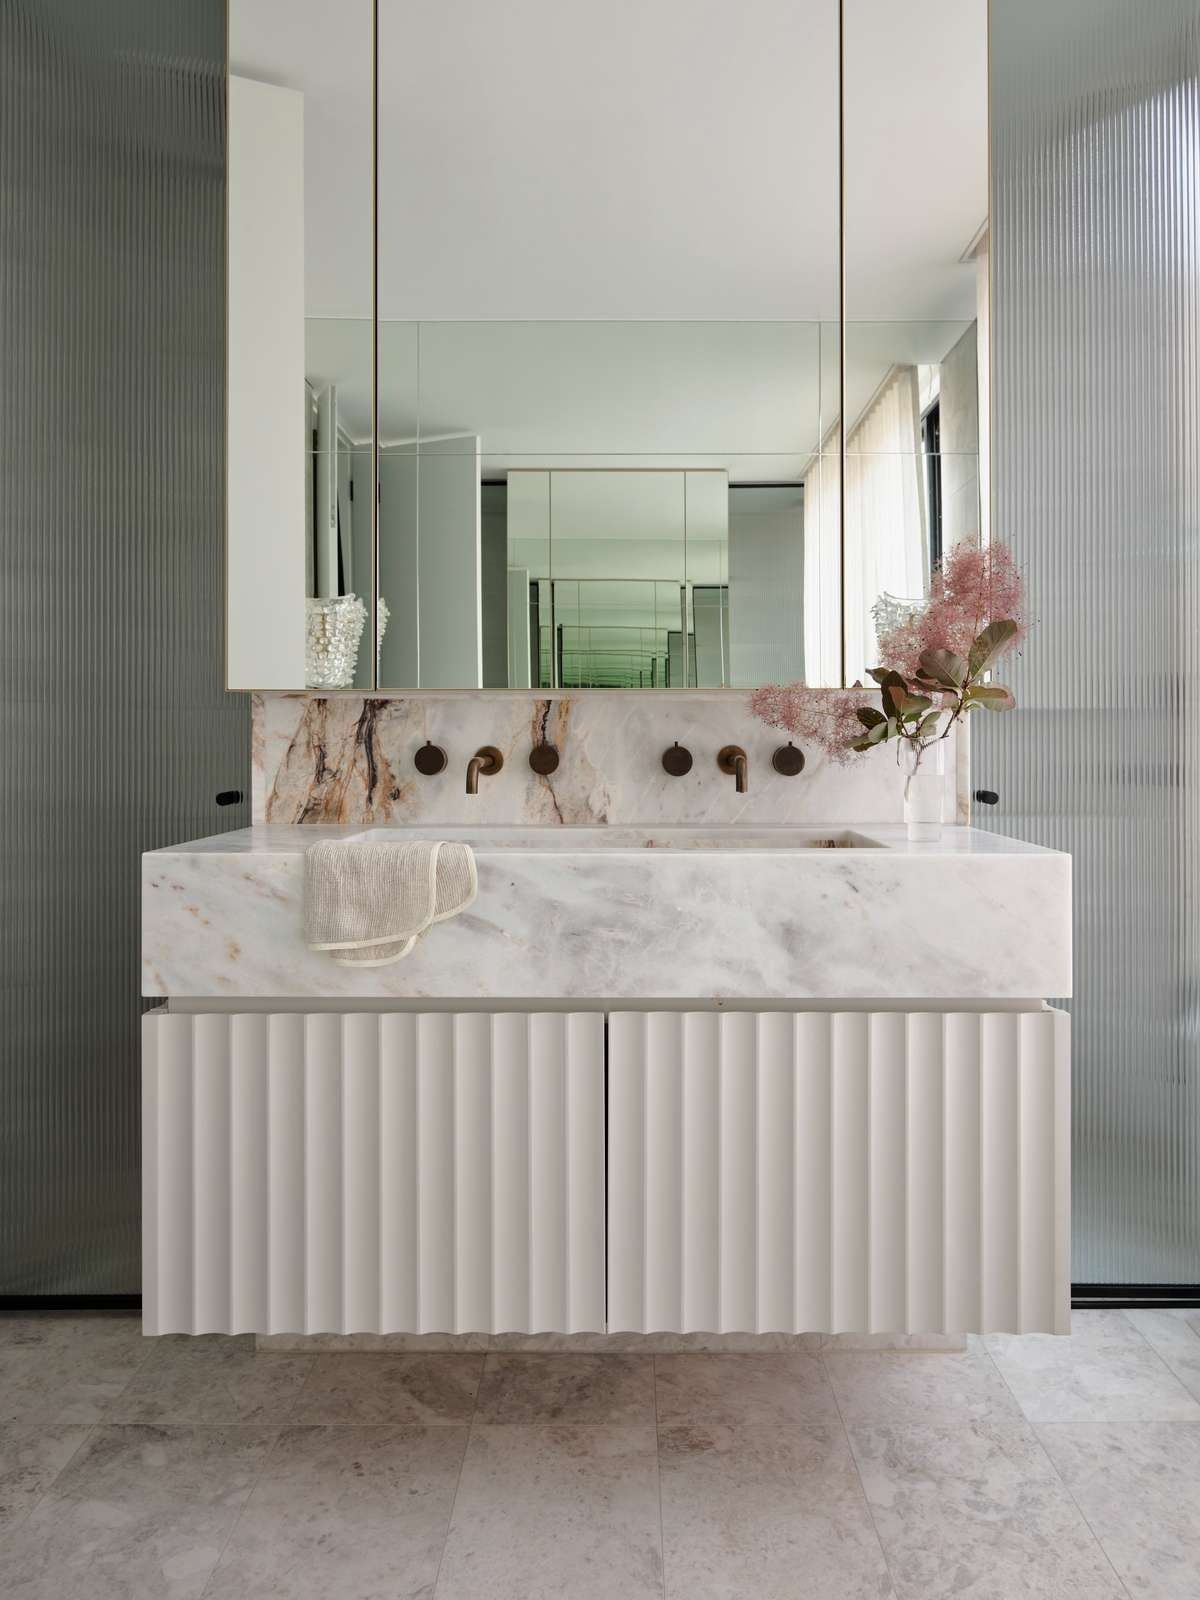 First Blush by Smac Studio. Fluted basin with fluted shadow doors. 